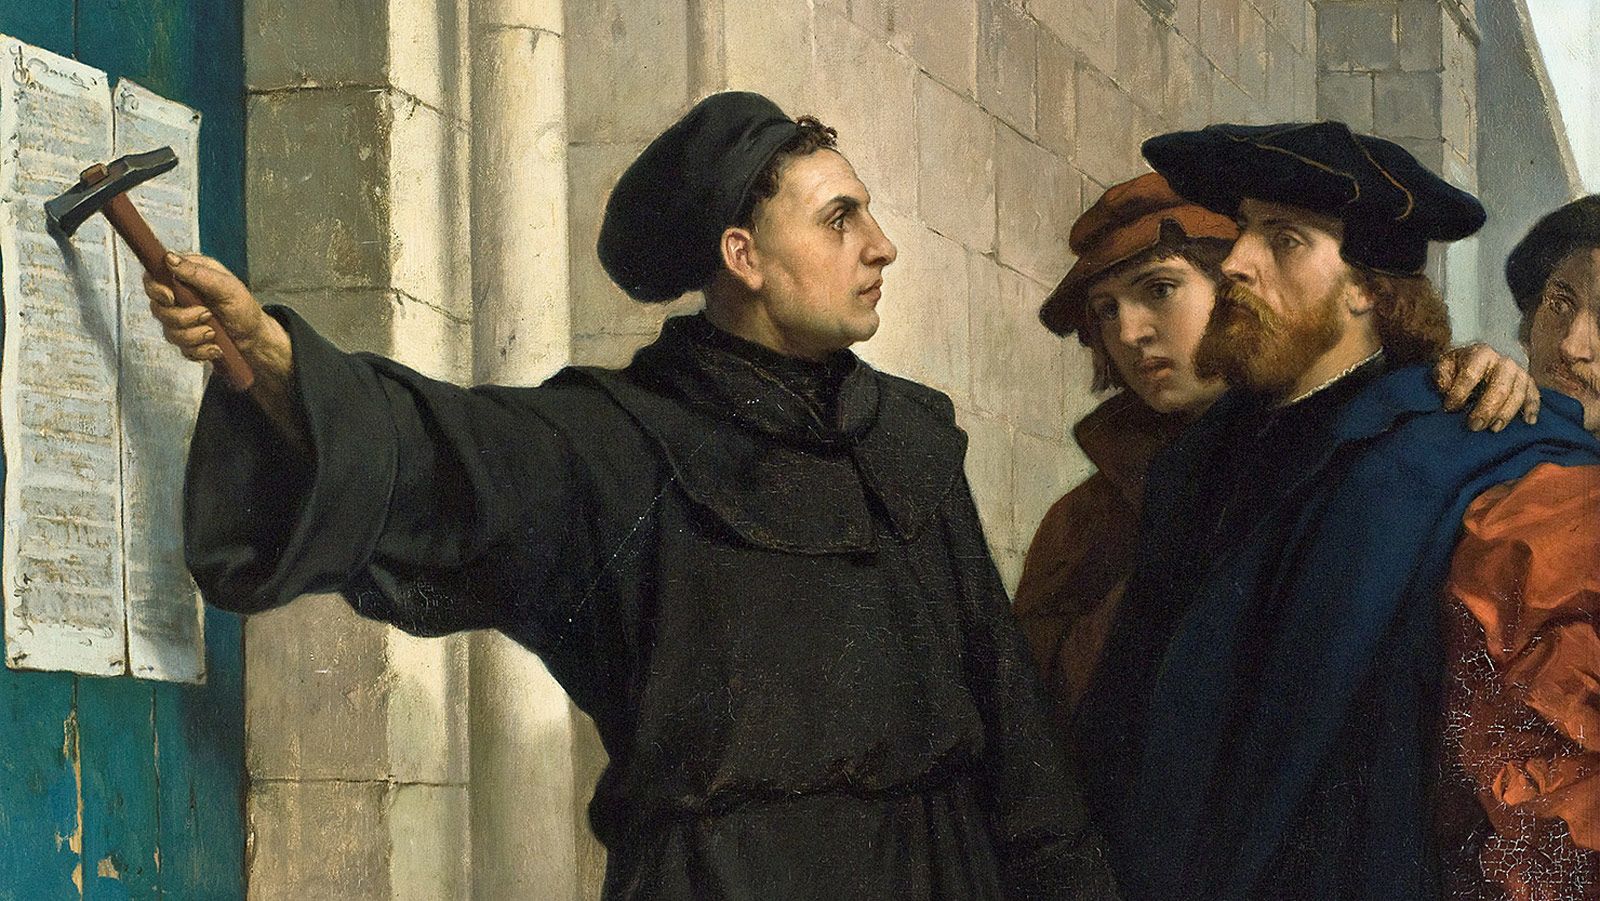 which was an important cause of the protestant reformation